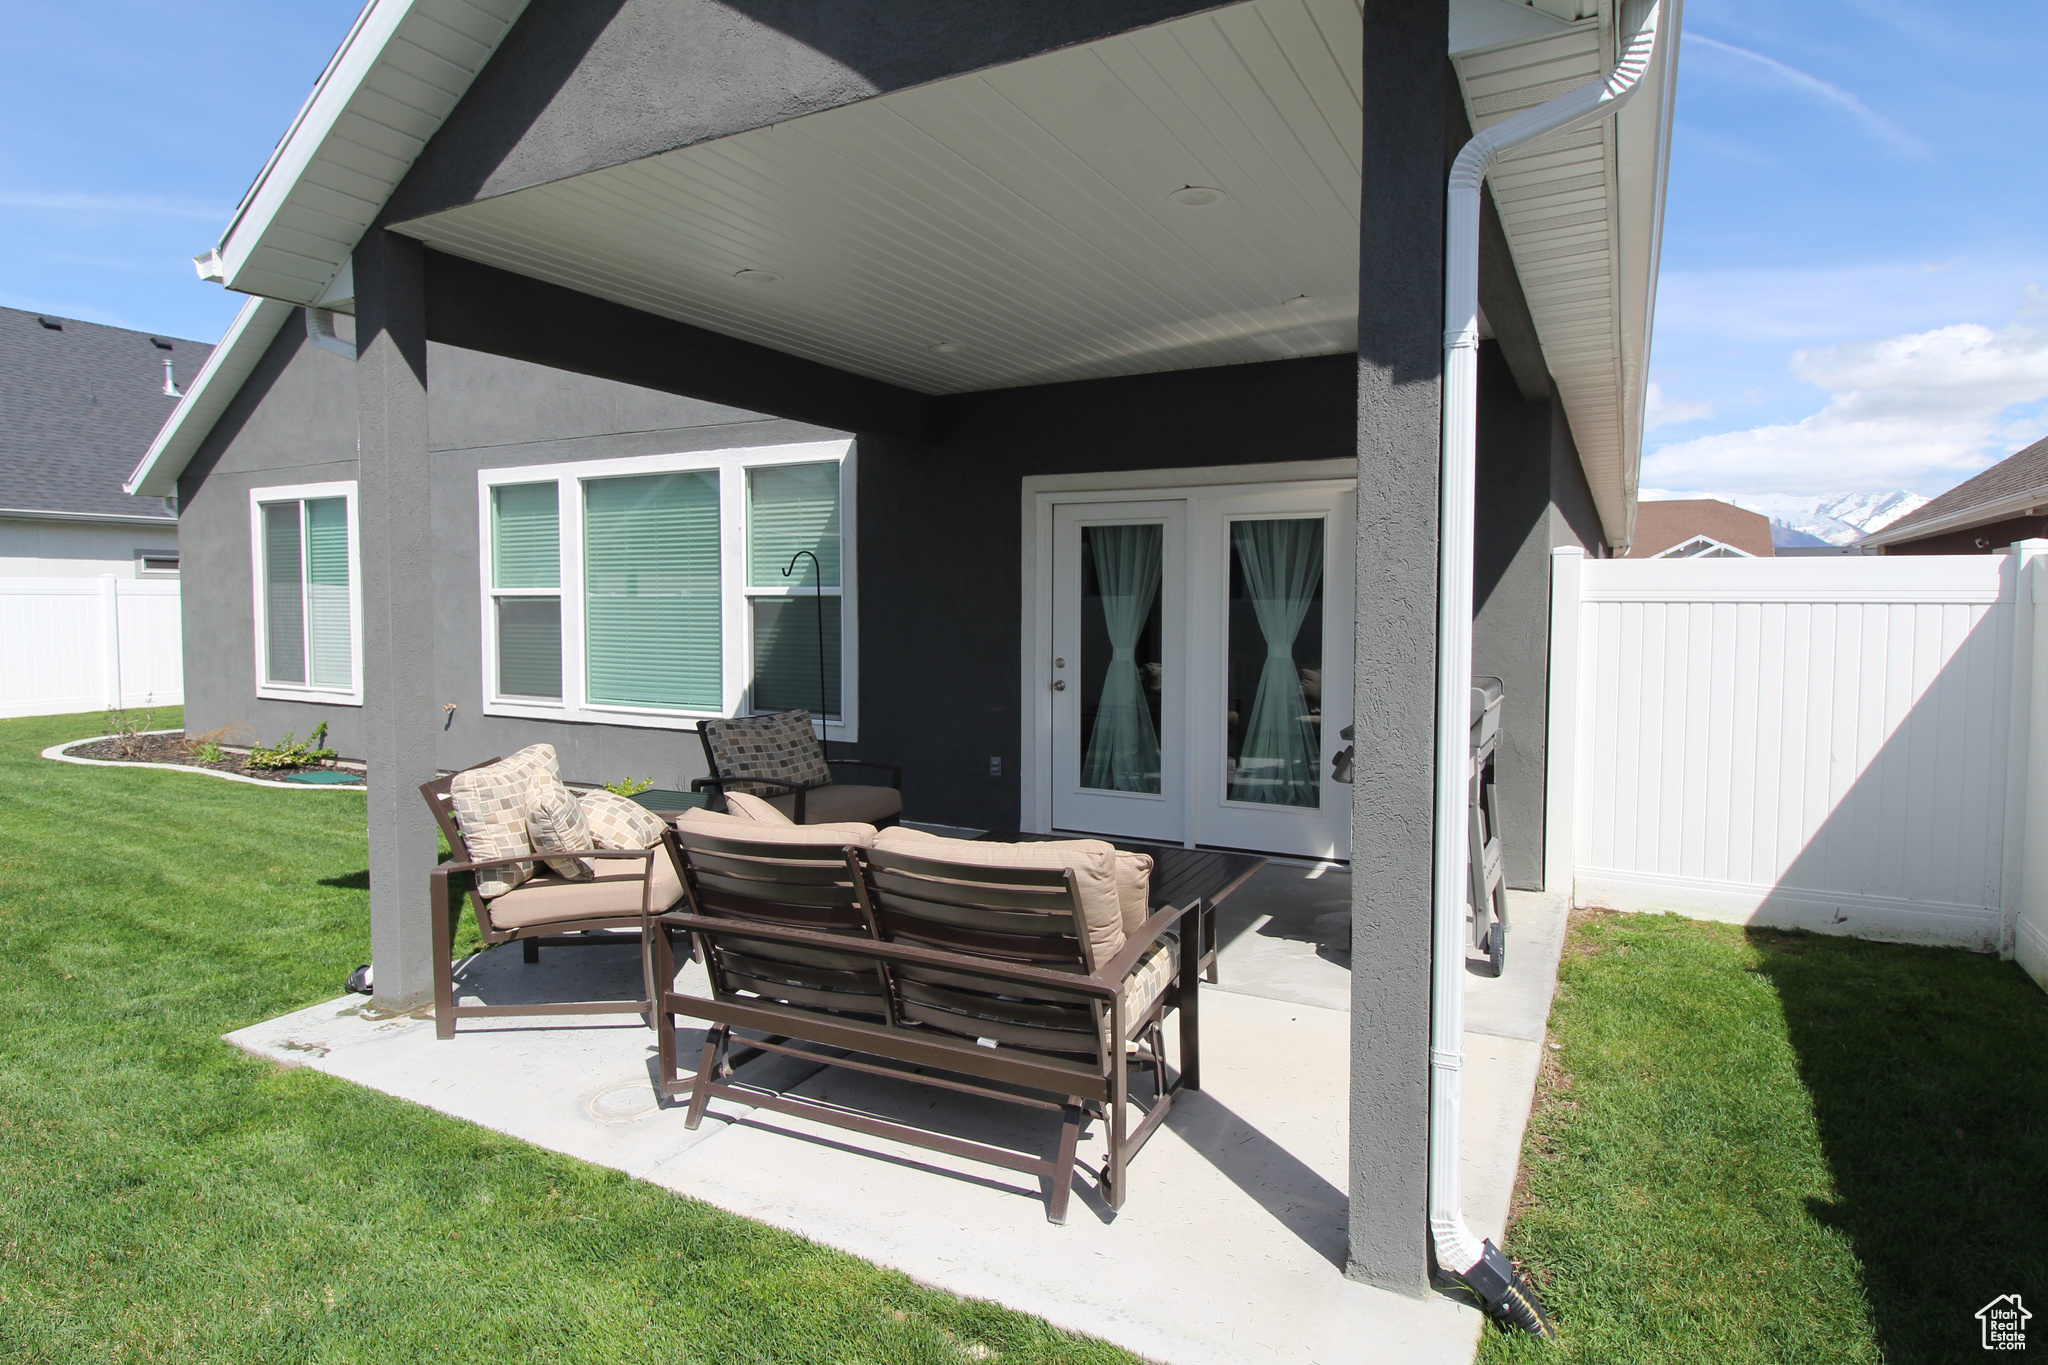 View of covered patio featuring grilling area and an outdoor hangout area